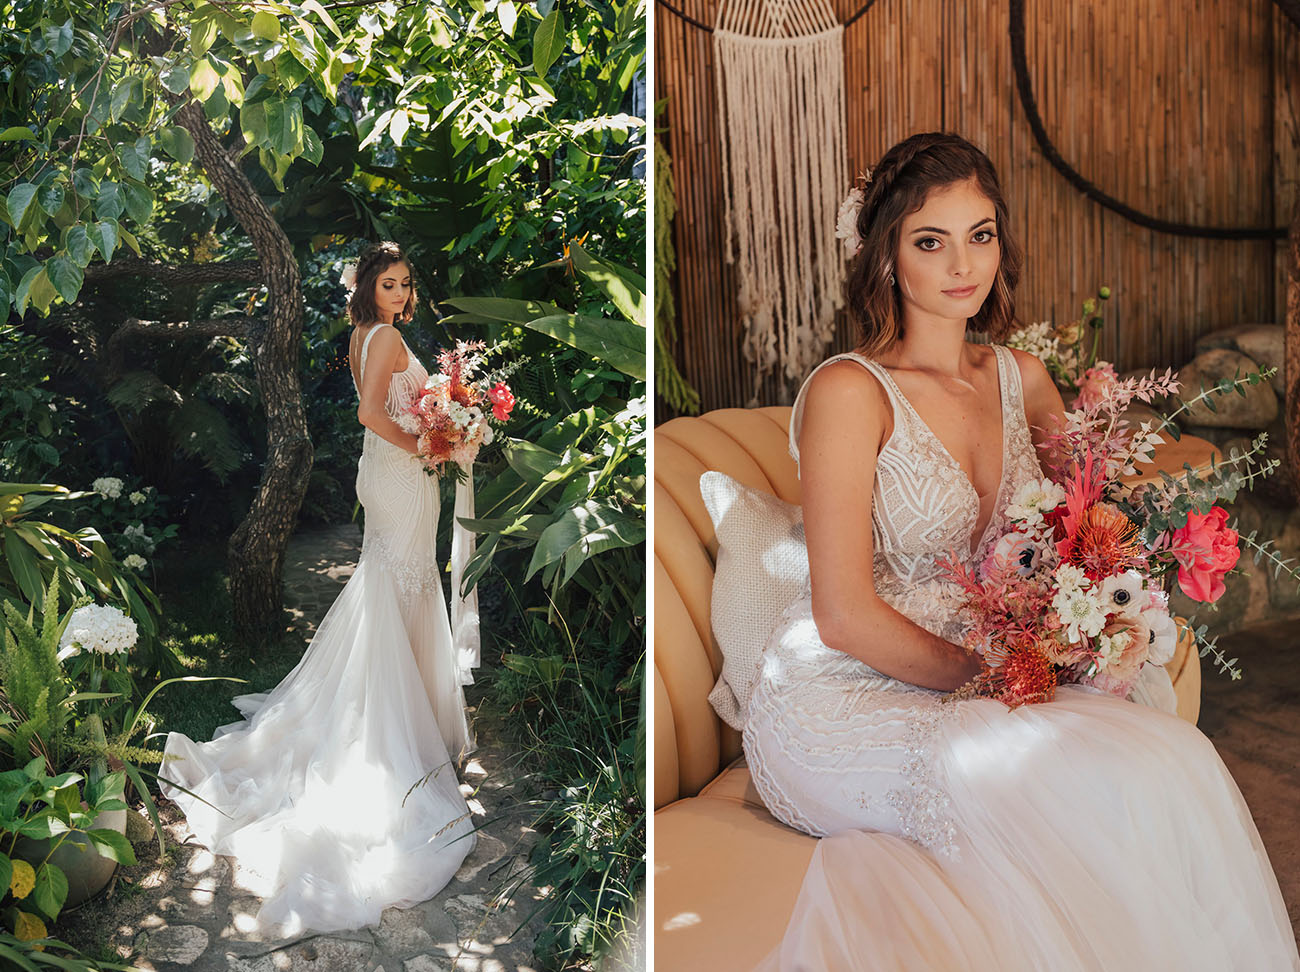 The second wedding dress was a glam mermaid one, with a plunging neckline and a train